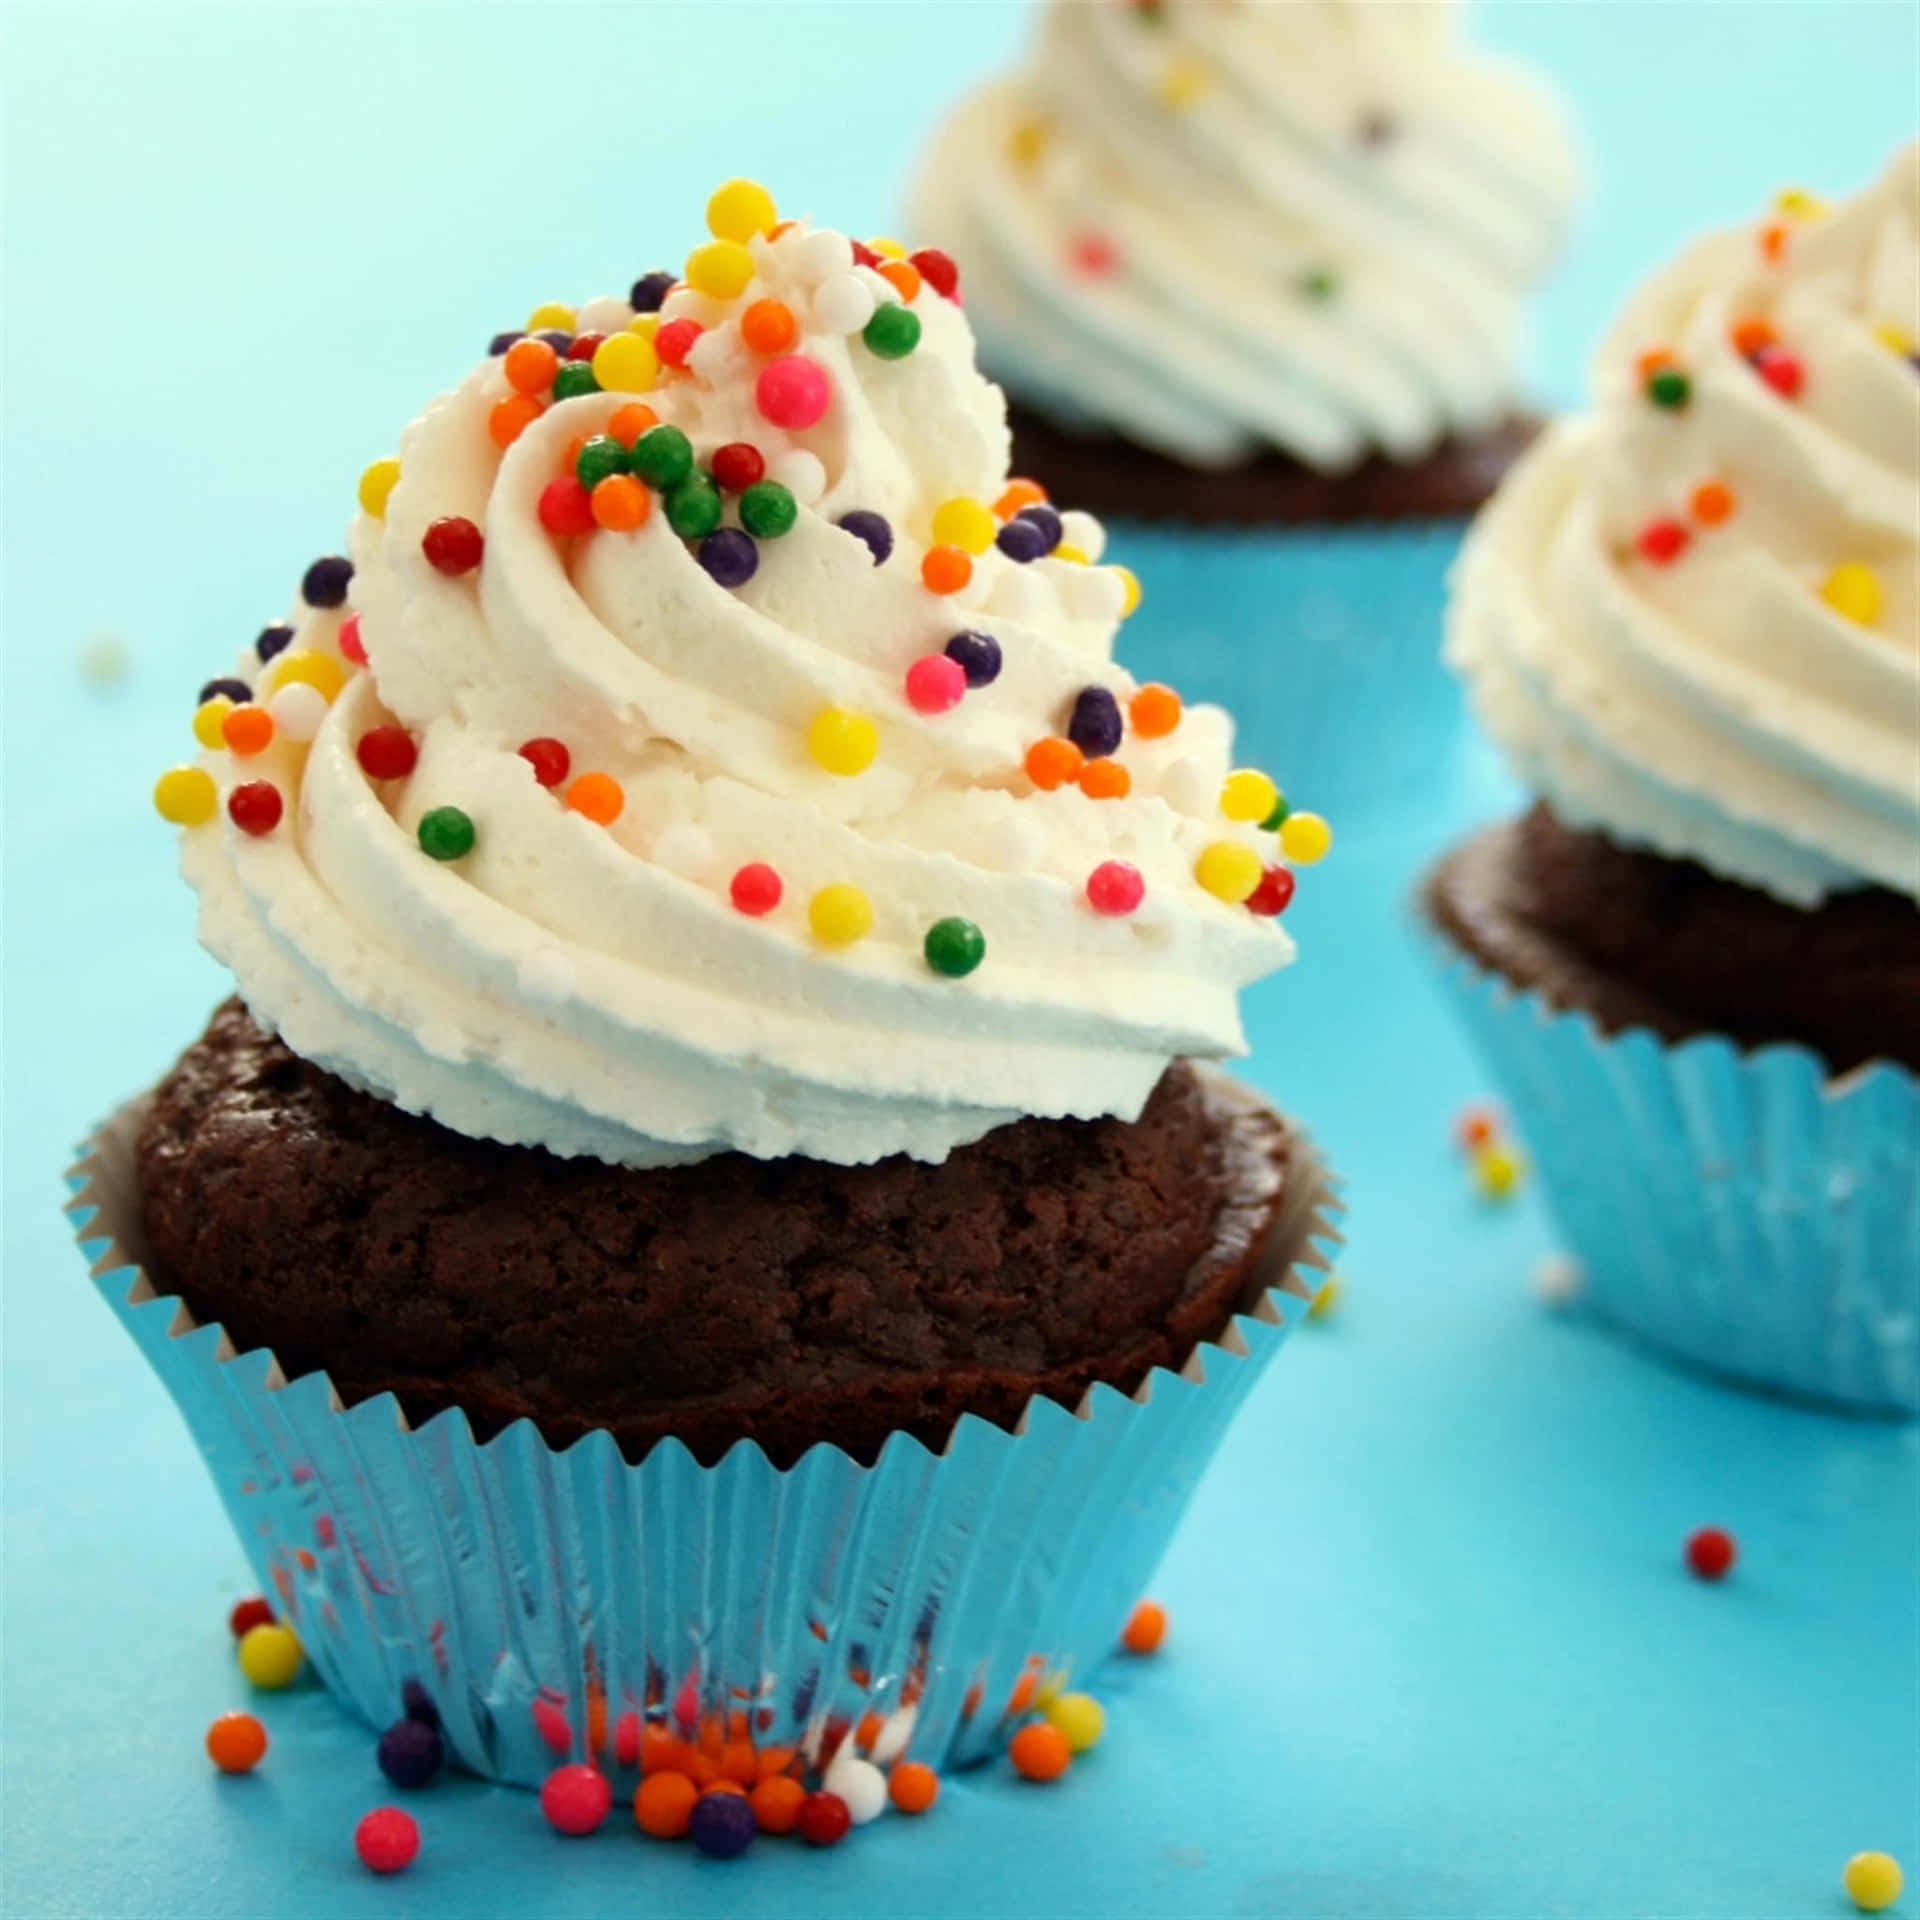 Yummy Cupcake With Cream And Sprinkles Background